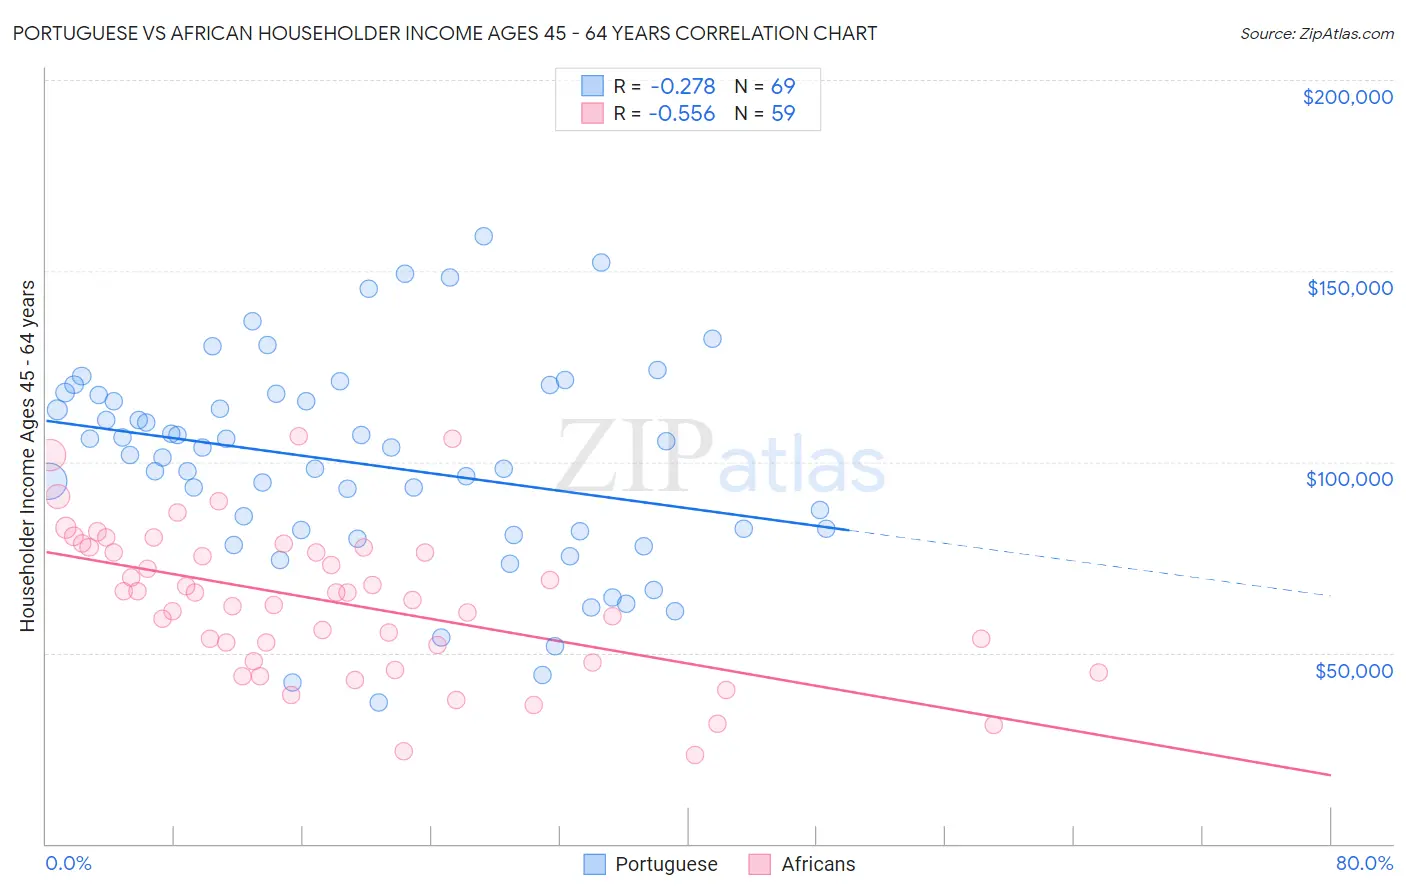 Portuguese vs African Householder Income Ages 45 - 64 years